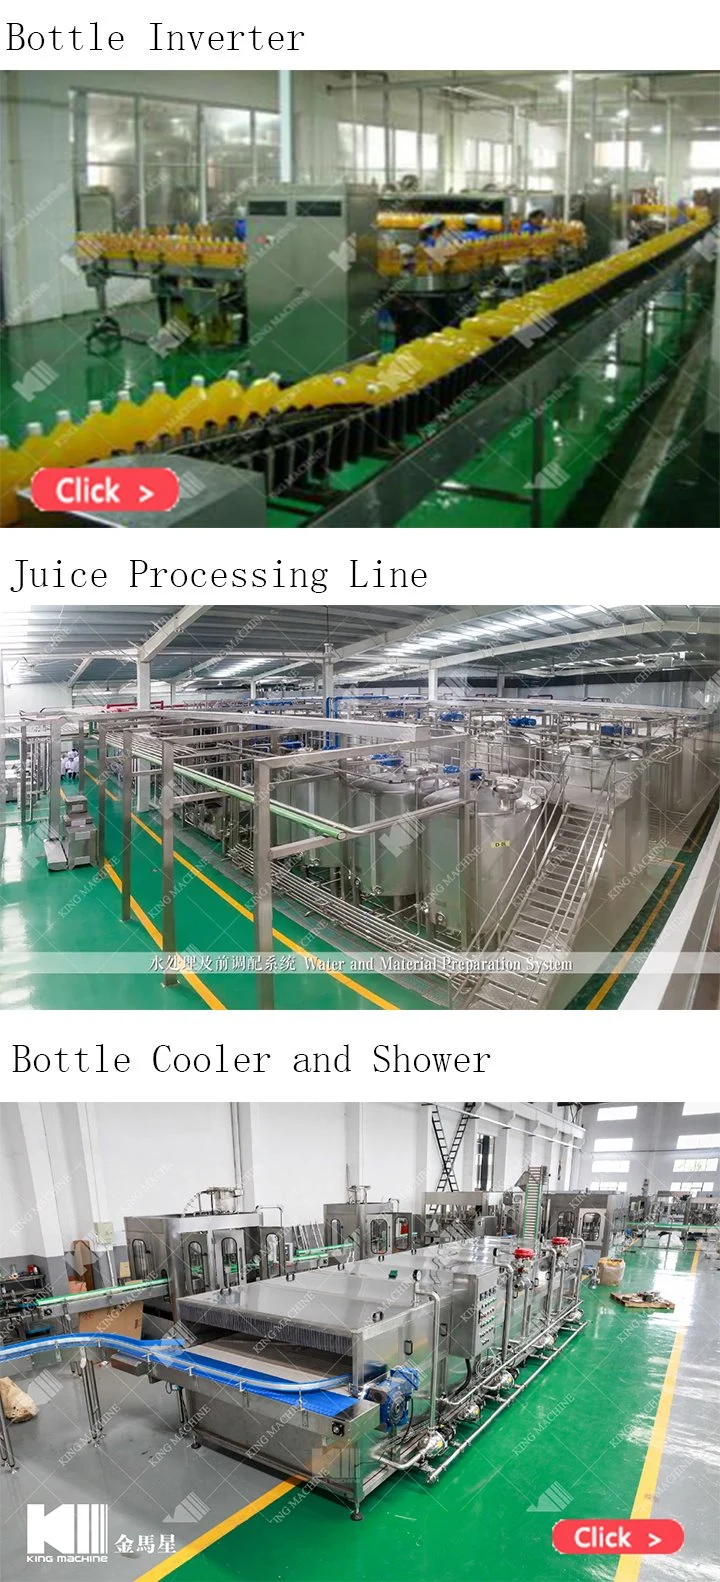 Automatic Bottle Filling Machine for Juice